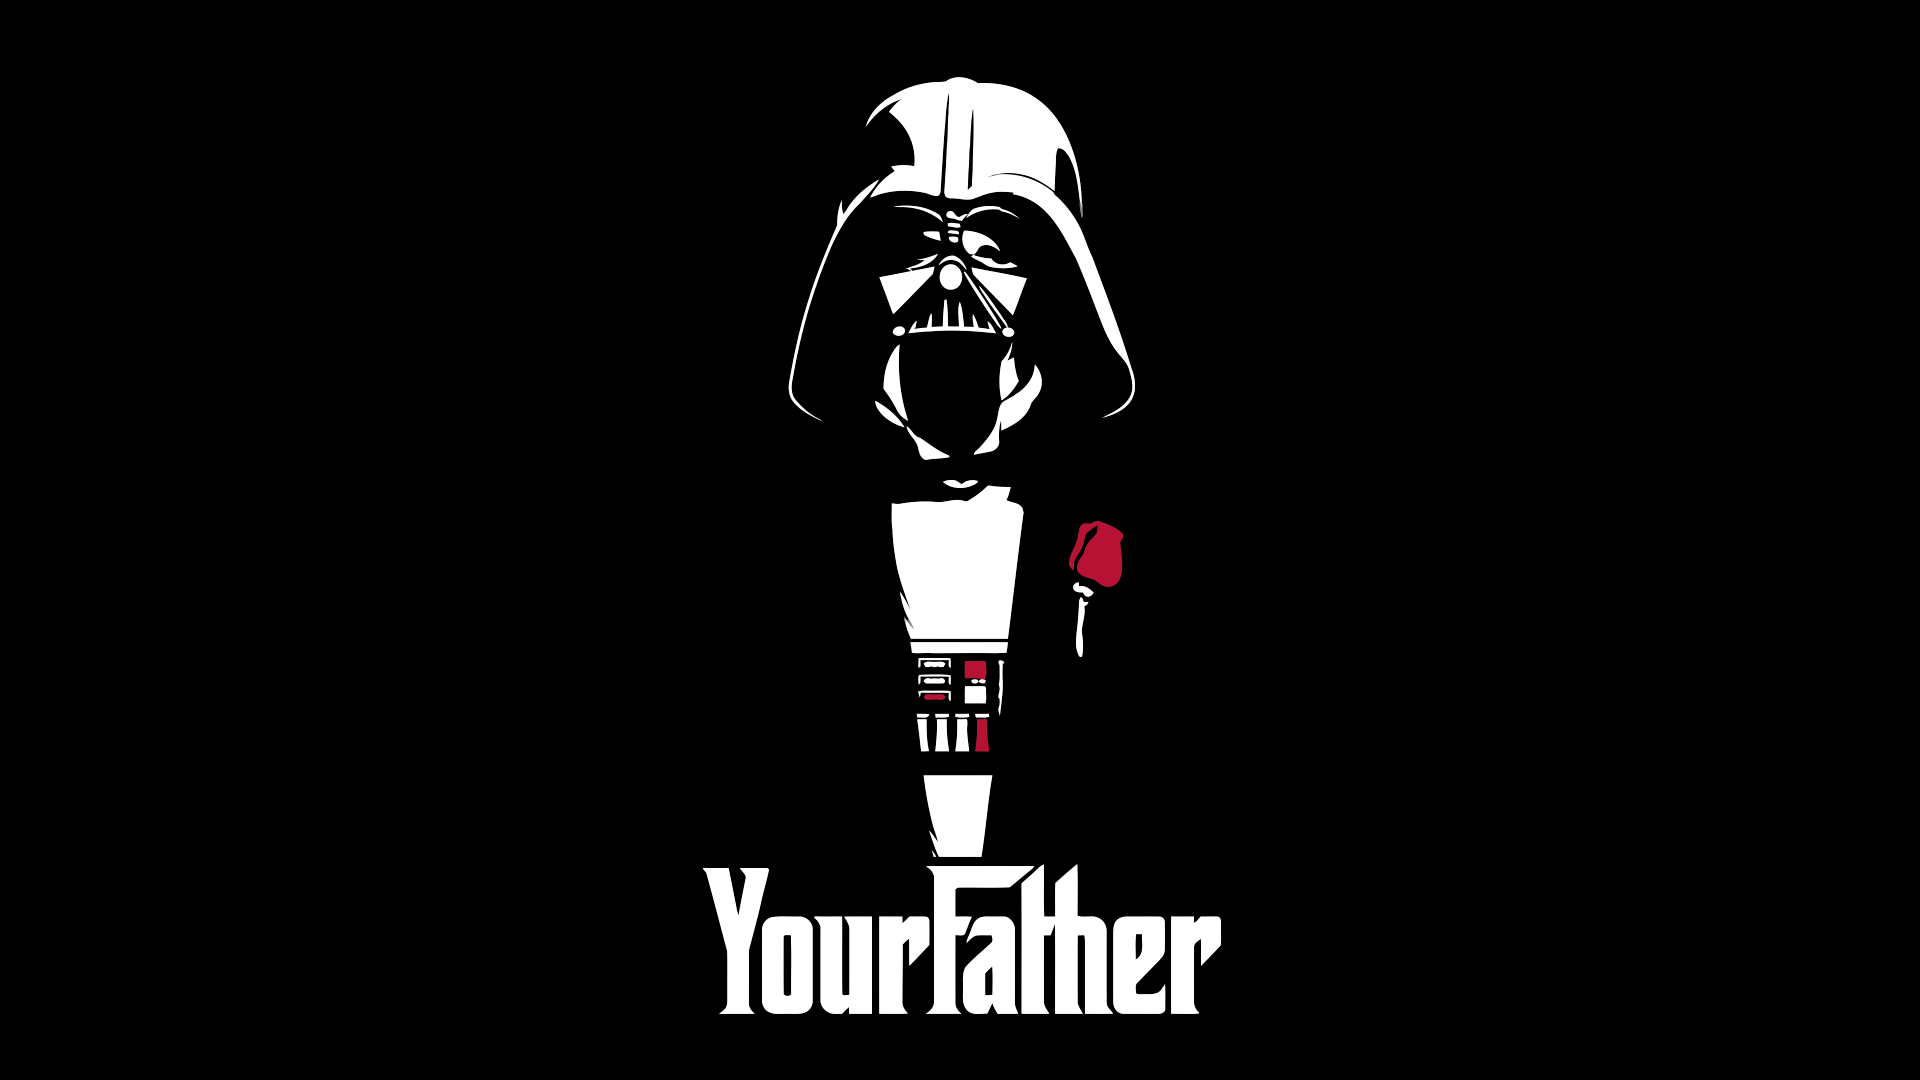 Darth Vader The Godfather Father Star Wars Sith Selective Coloring Humor Minimalism 1920x1080